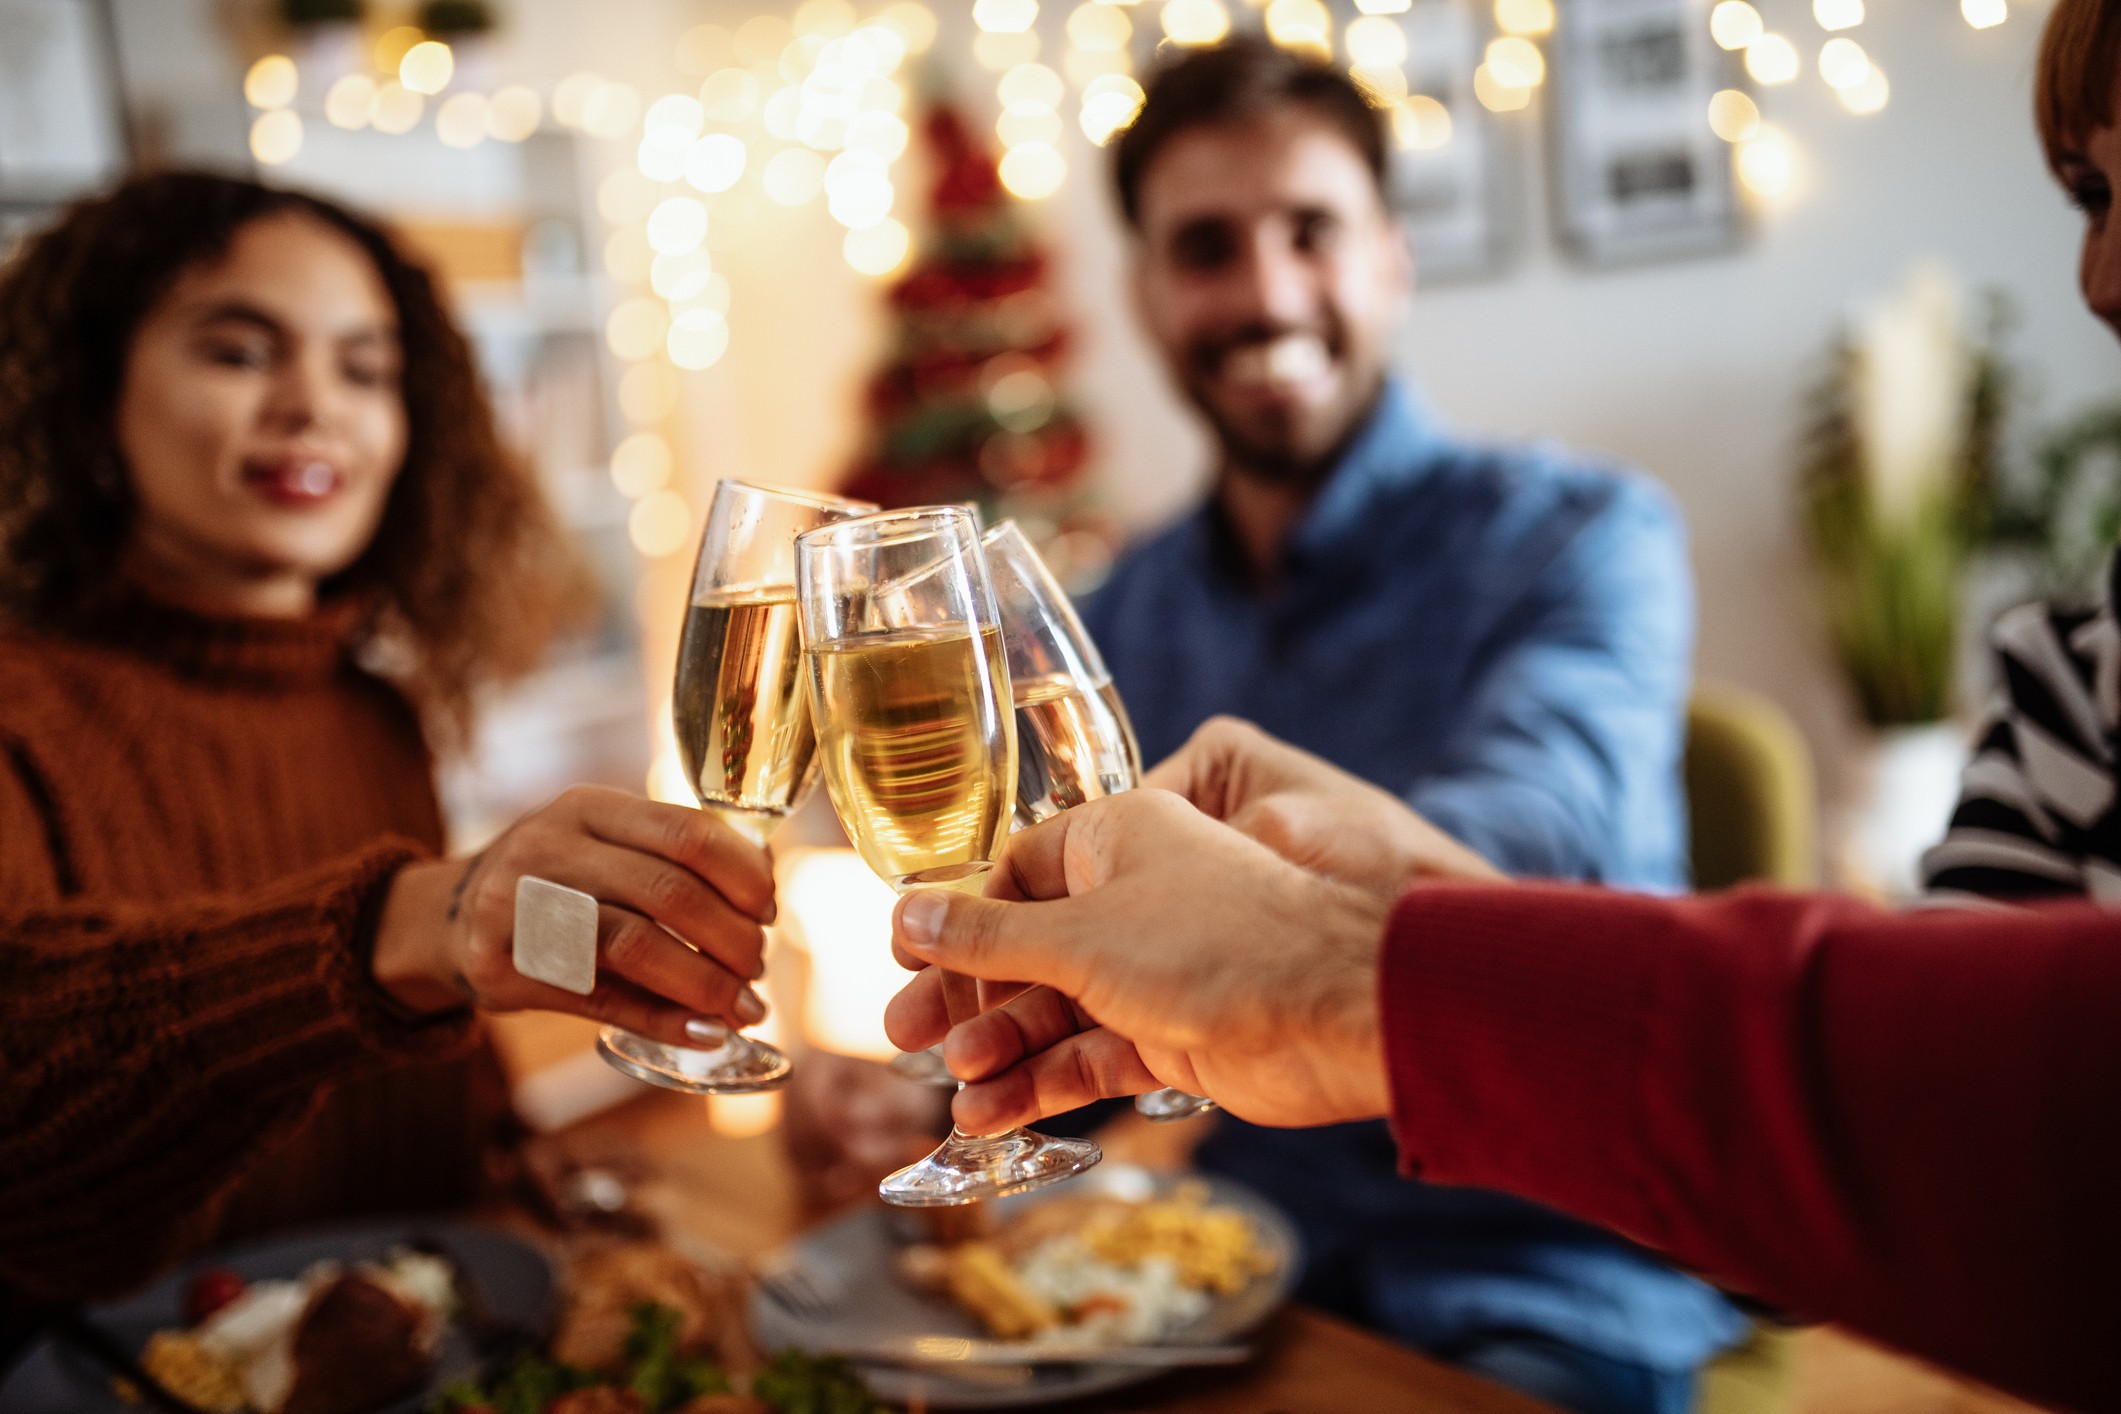 Friends celebrate Christmas and enjoying dinner while toasting with wine